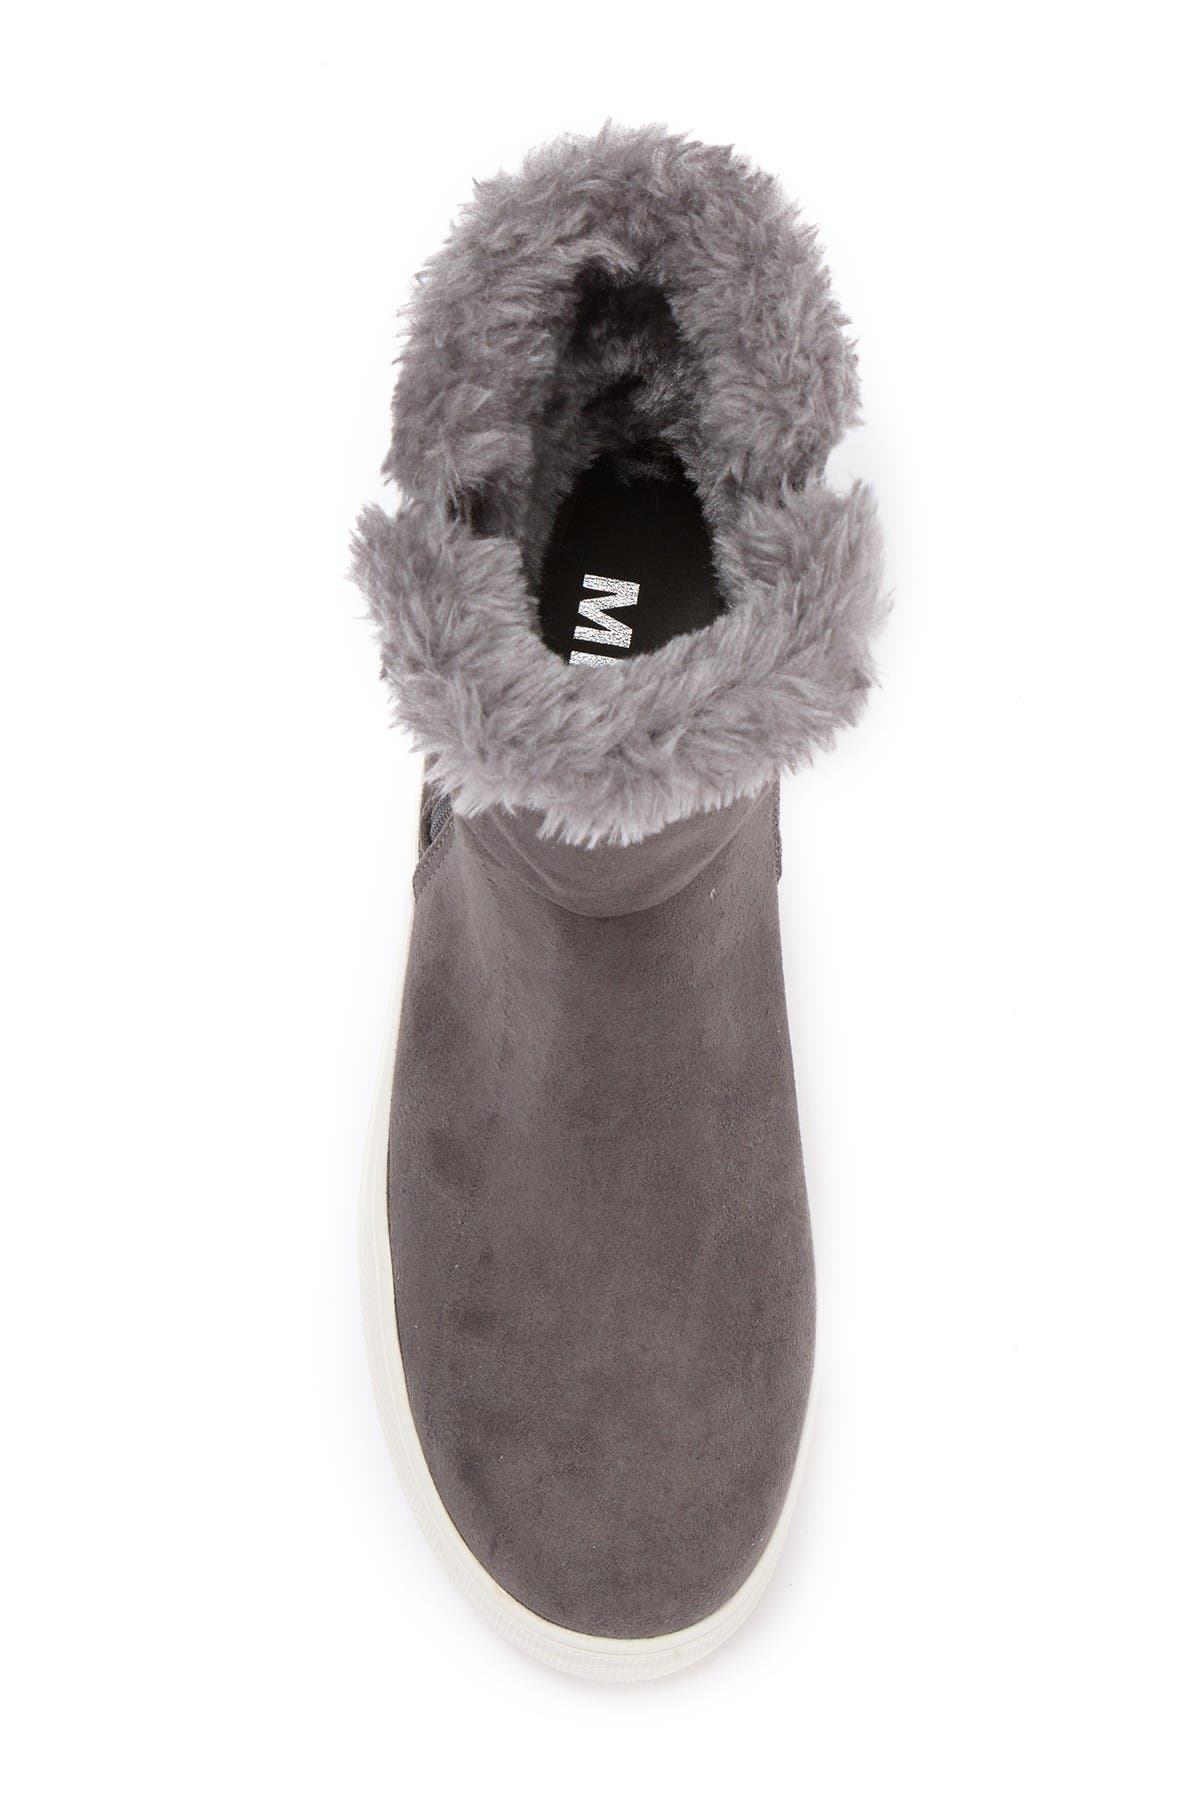 mia merion faux fur lined boot